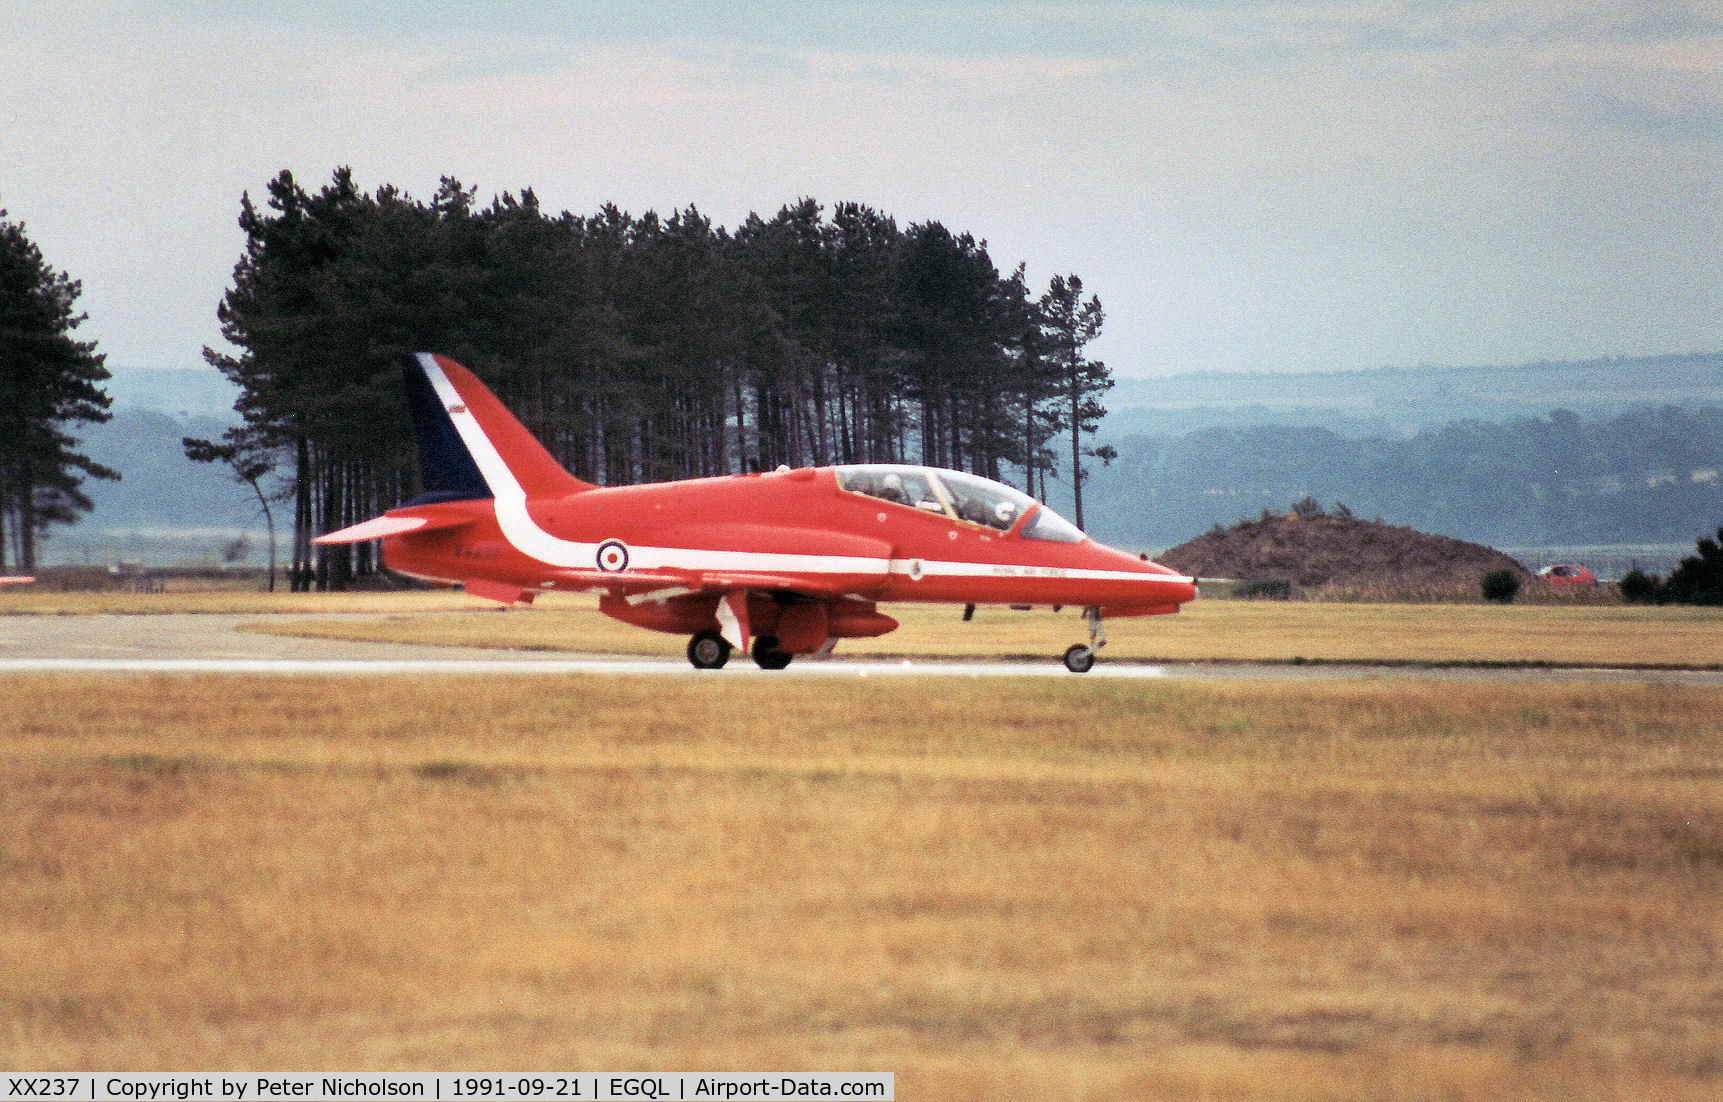 XX237, 1978 Hawker Siddeley Hawk T.1A C/N 073/312073, Hawk T.1A of the Red Arrows display team lining up for take-off at the 1991 RAF Leuchars Airshow.